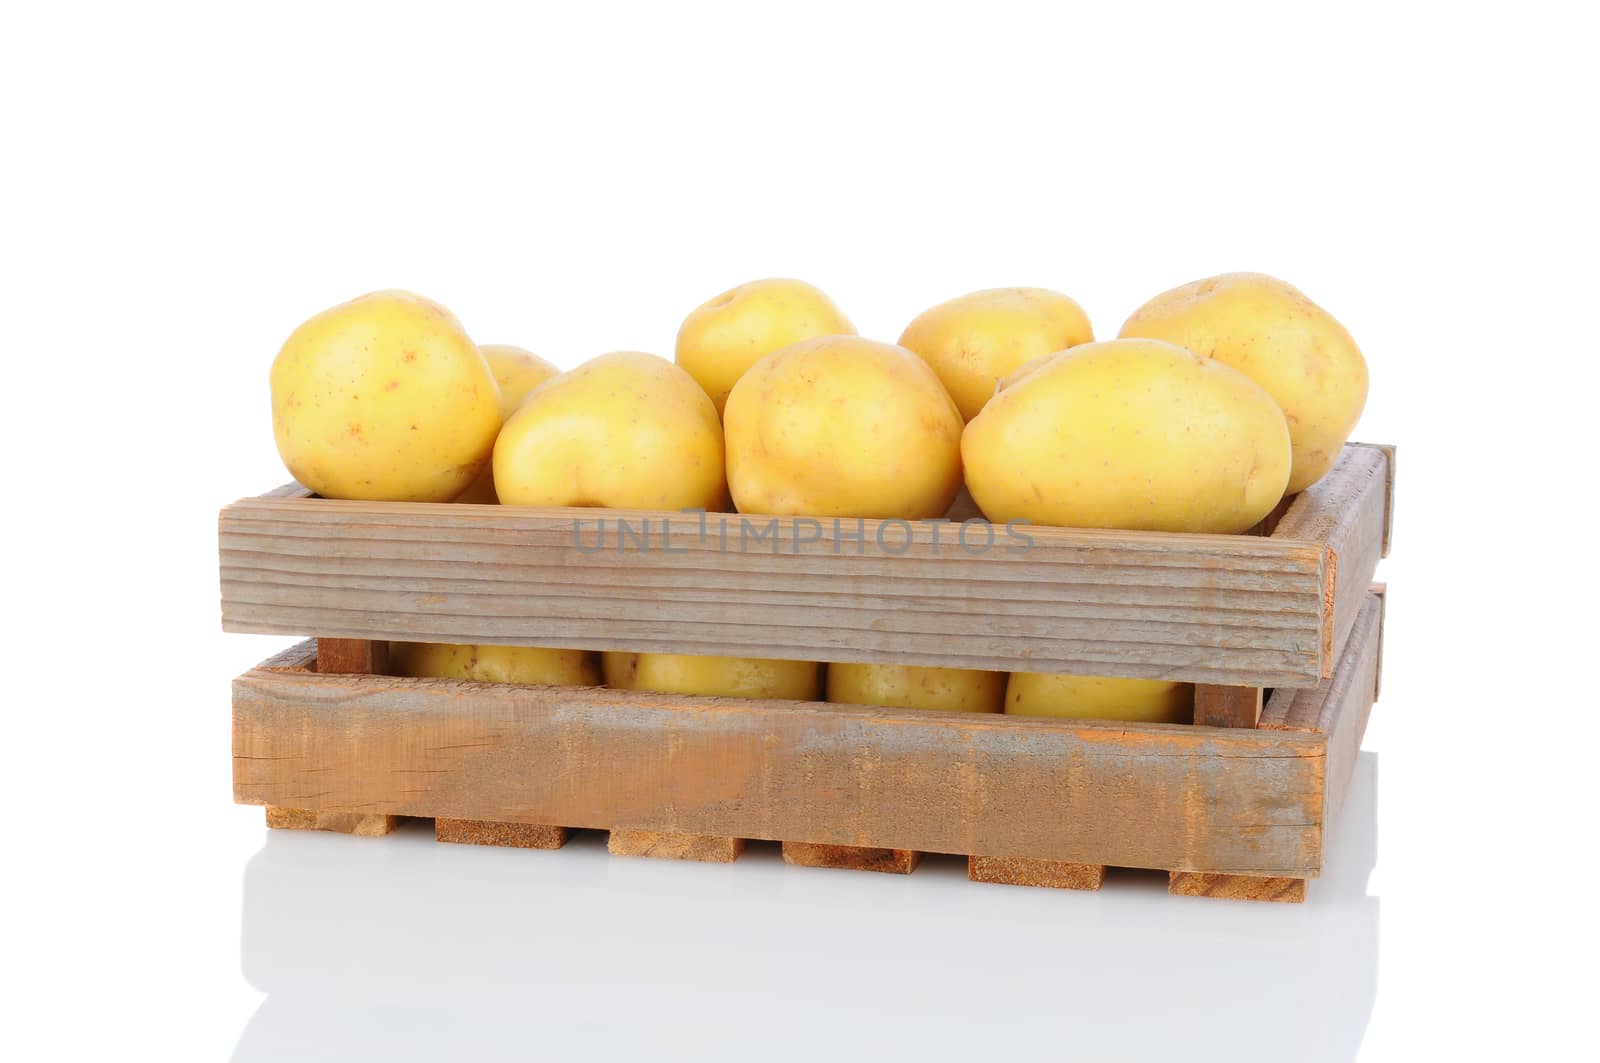 A wooden crate full of  white potatoes on a white background with reflection. Horizontal Format.